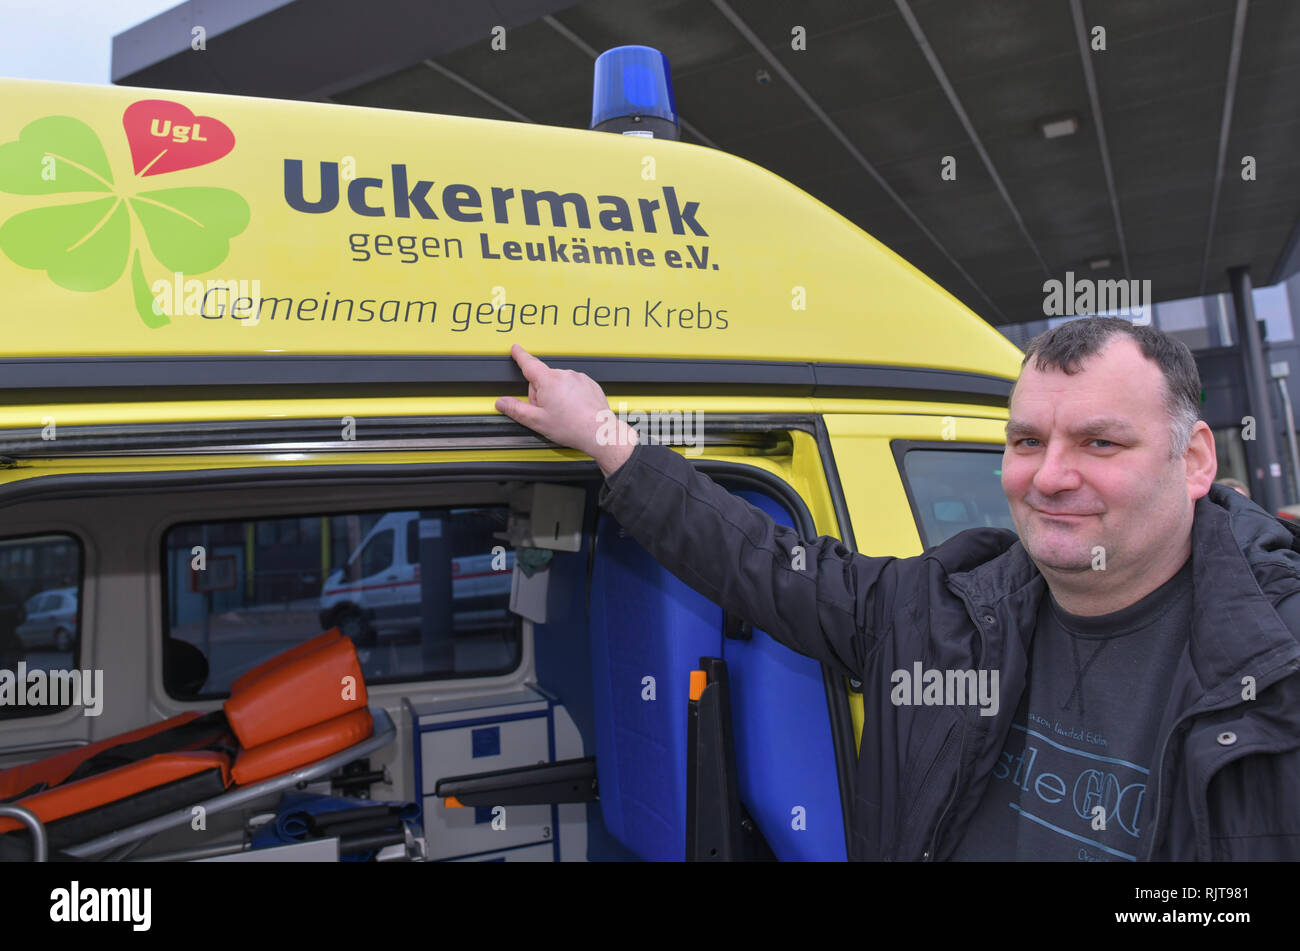 31 January 2019, Brandenburg, Schwedt: Enrico Wendt, from the Uckermark vs Leukämie e.V. association, stands next to the Glücksmobil. When the remaining life time is short due to a fatal disease, people who are affected often have long cherished but never fulfilled dreams. In the Uckermark, an association wants to help fulfil them so that the sick person can 'let go without a wish'. Photo: Patrick Pleul/dpa-Zentralbild/ZB Stock Photo